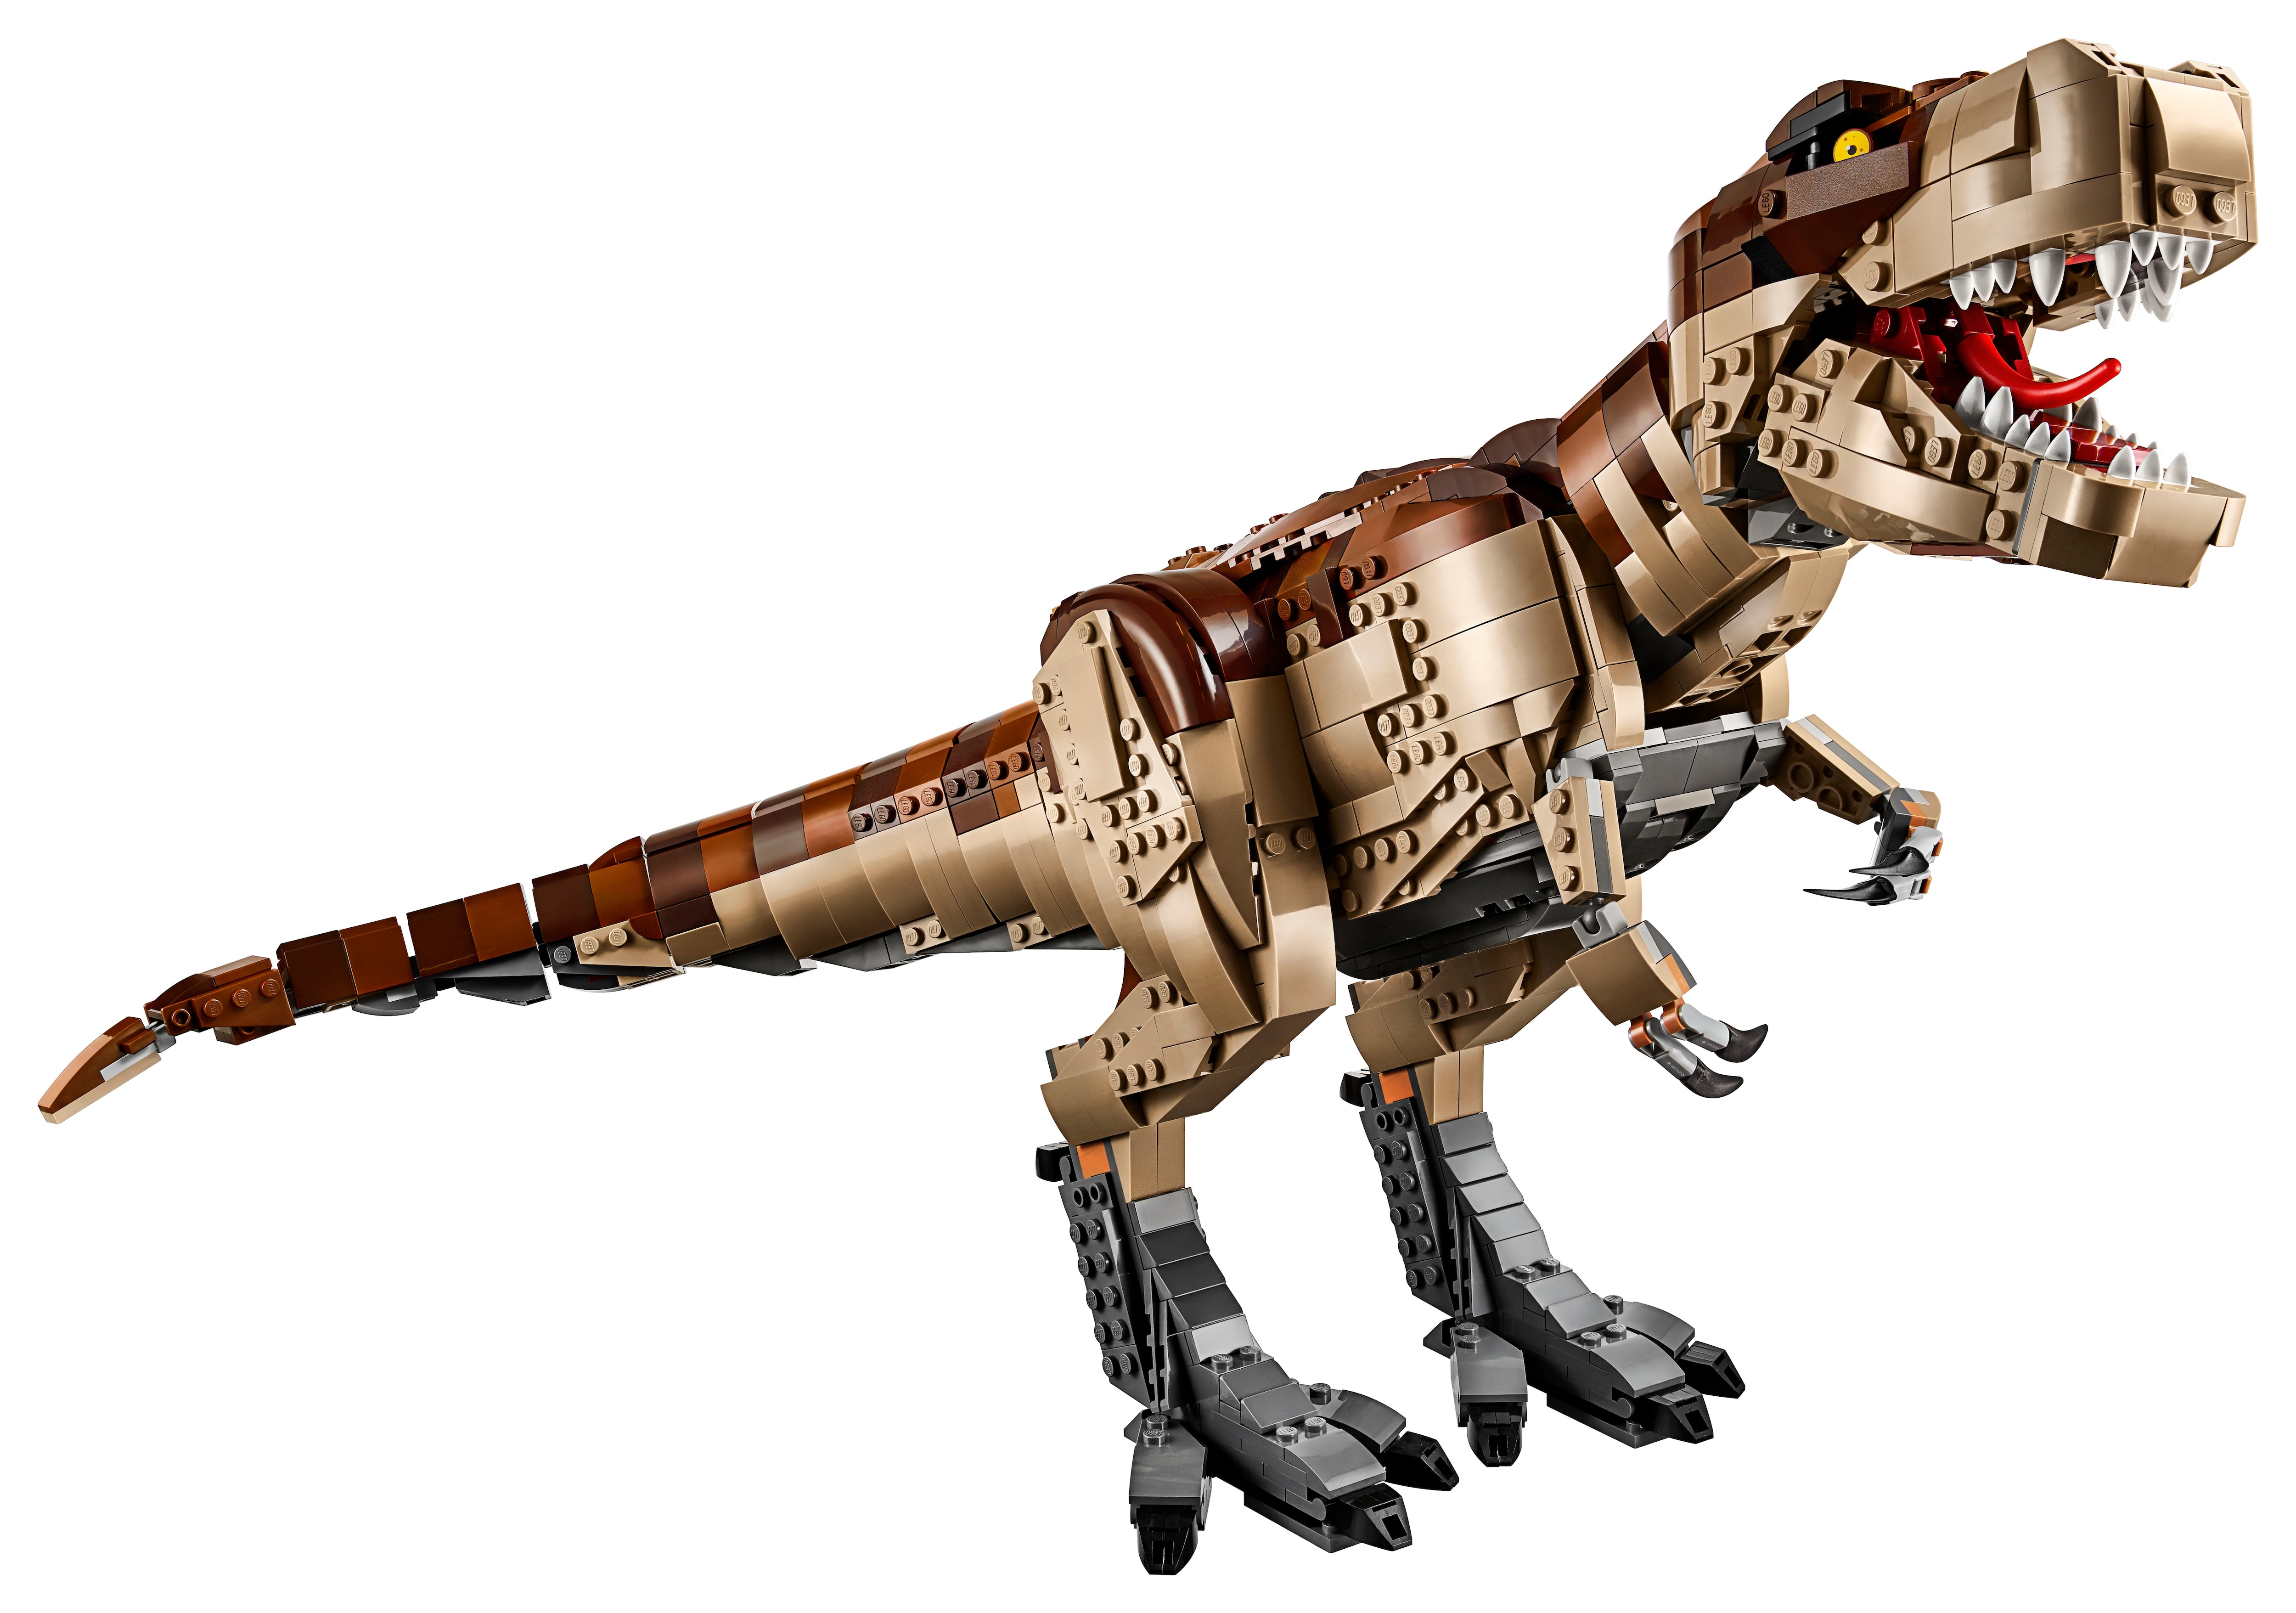 LEGO introduces the classic Jurassic Park gate and T. rex